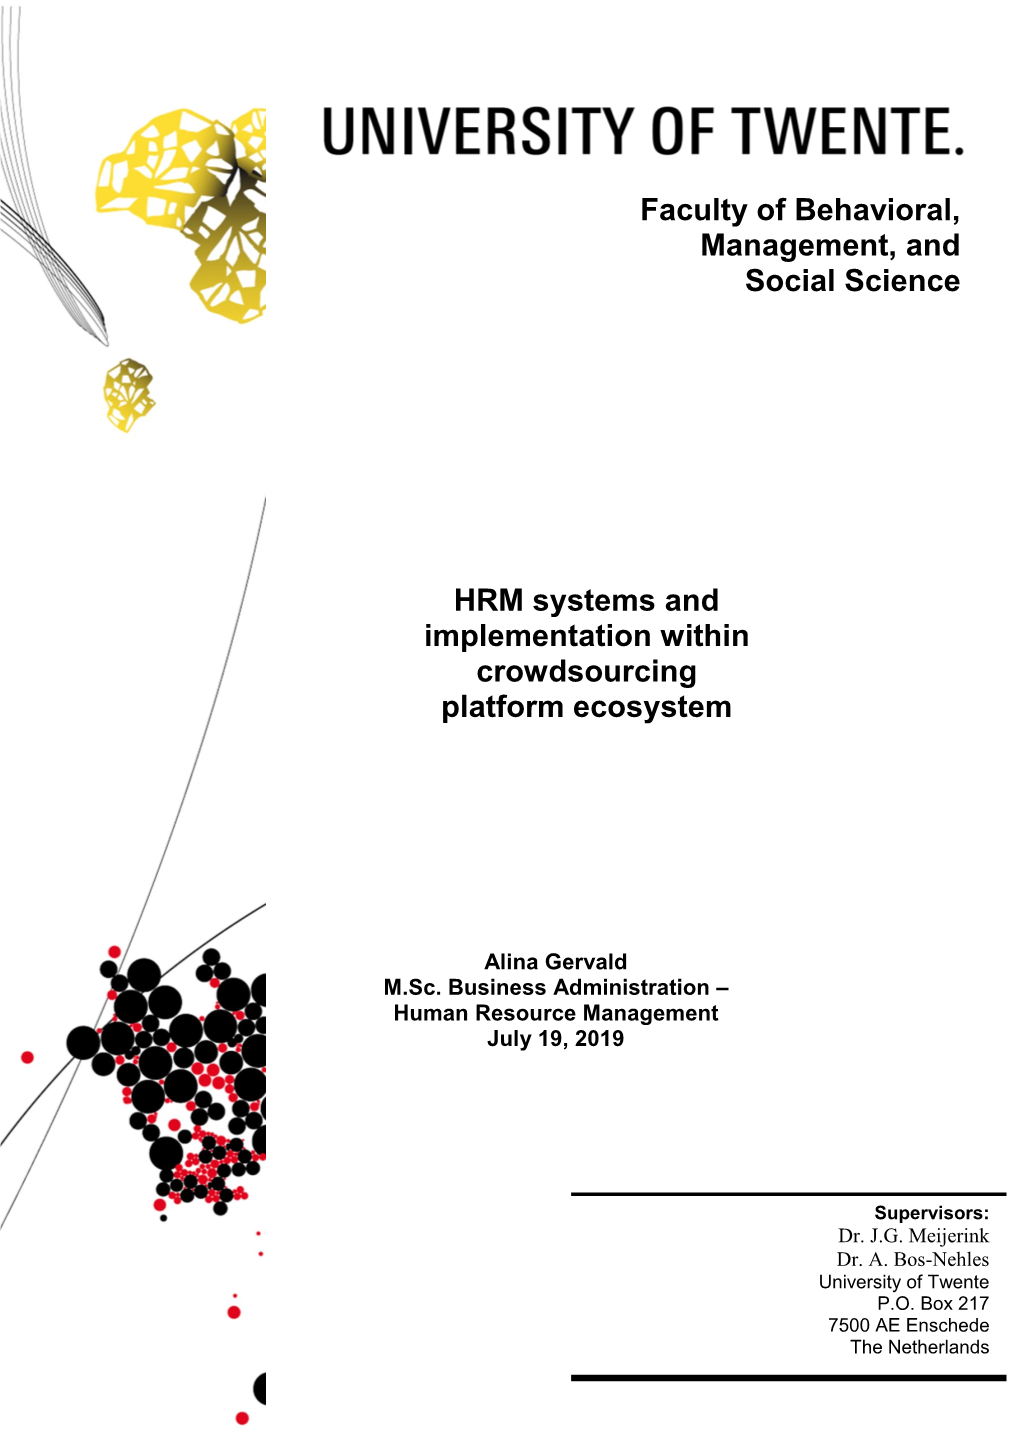 HRM Systems and Implementation Within Crowdsourcing Platform Ecosystem